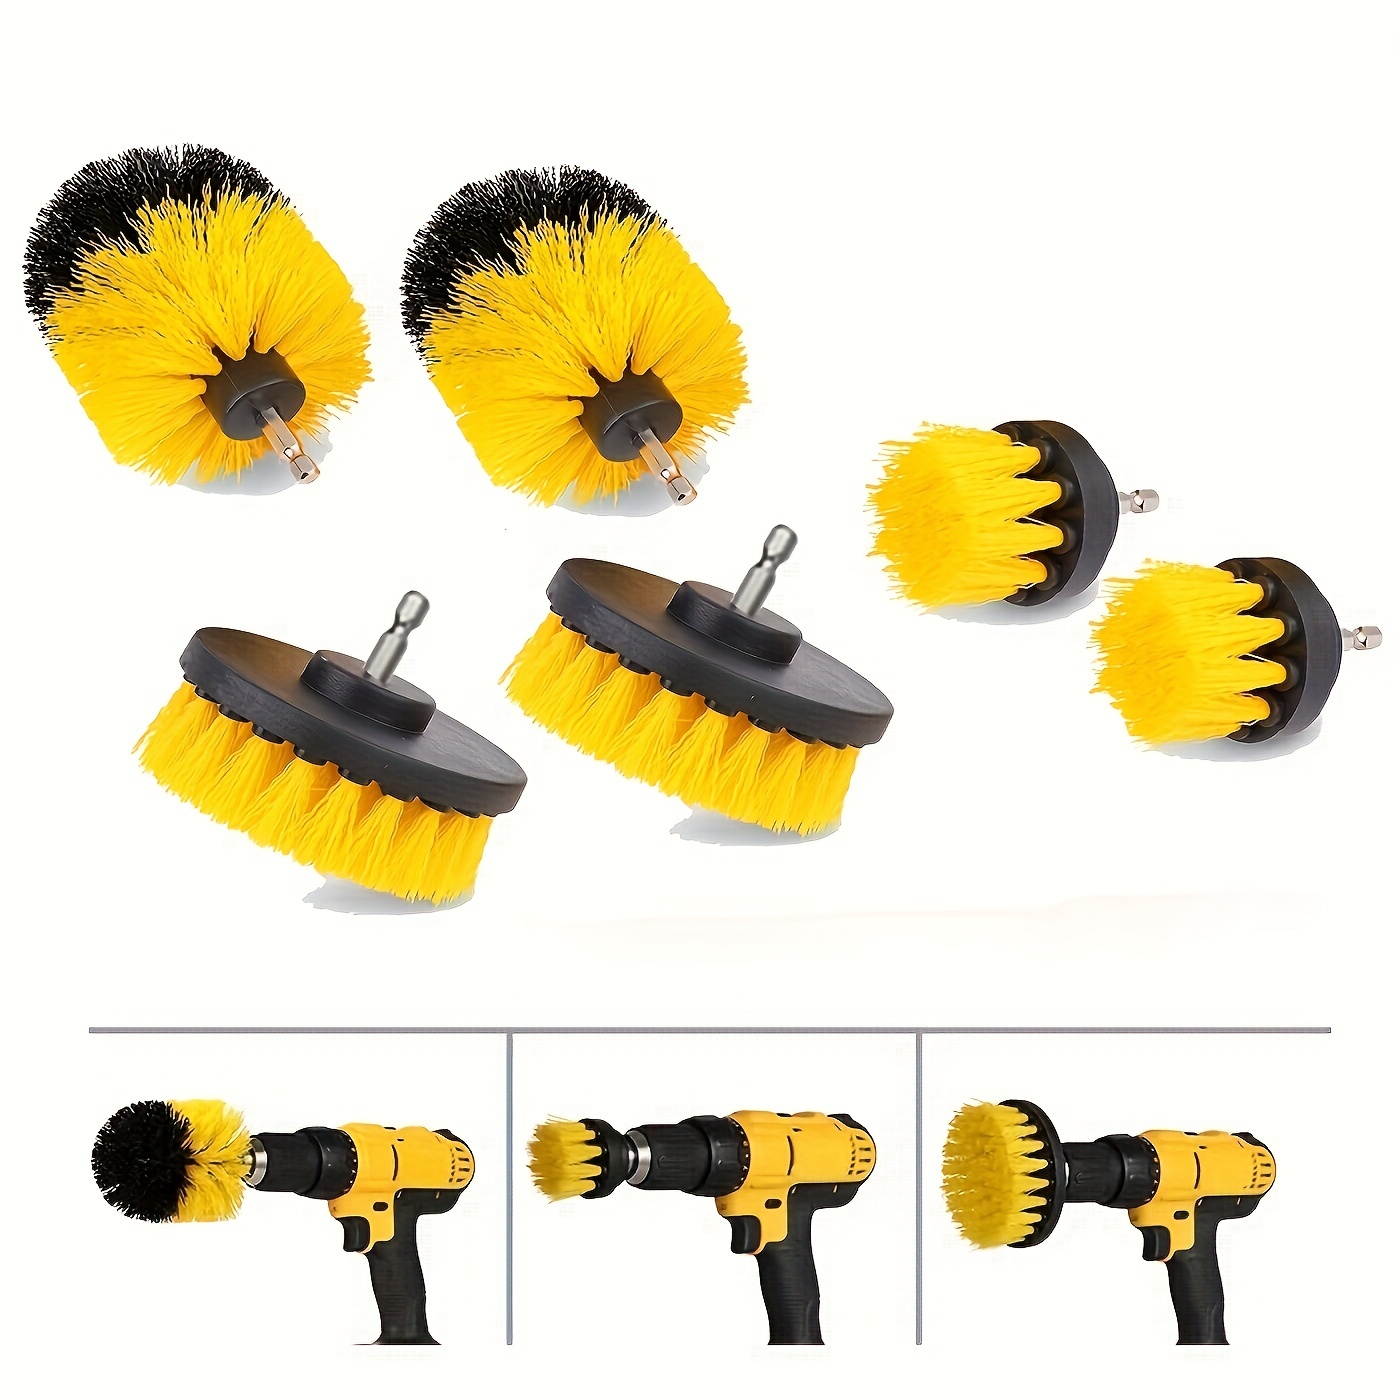 20 Pcs Electric Brush Attachment Cleaning Brushes Sponge Power